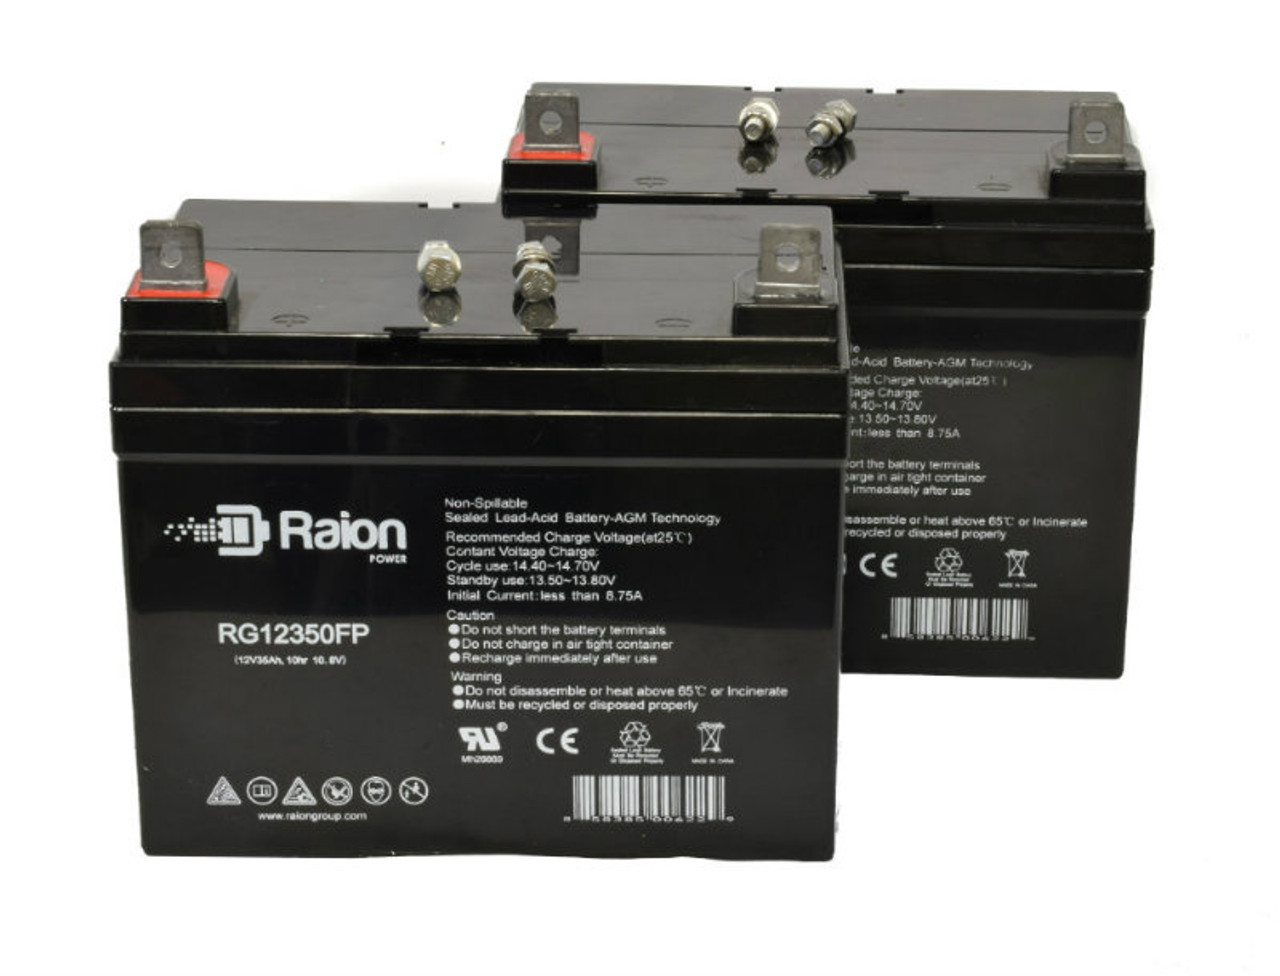 Raion Power Replacement 12V 35Ah Group U1 Battery for Pihsiang Wheelchair 109101-88107-36L - 2 Pack